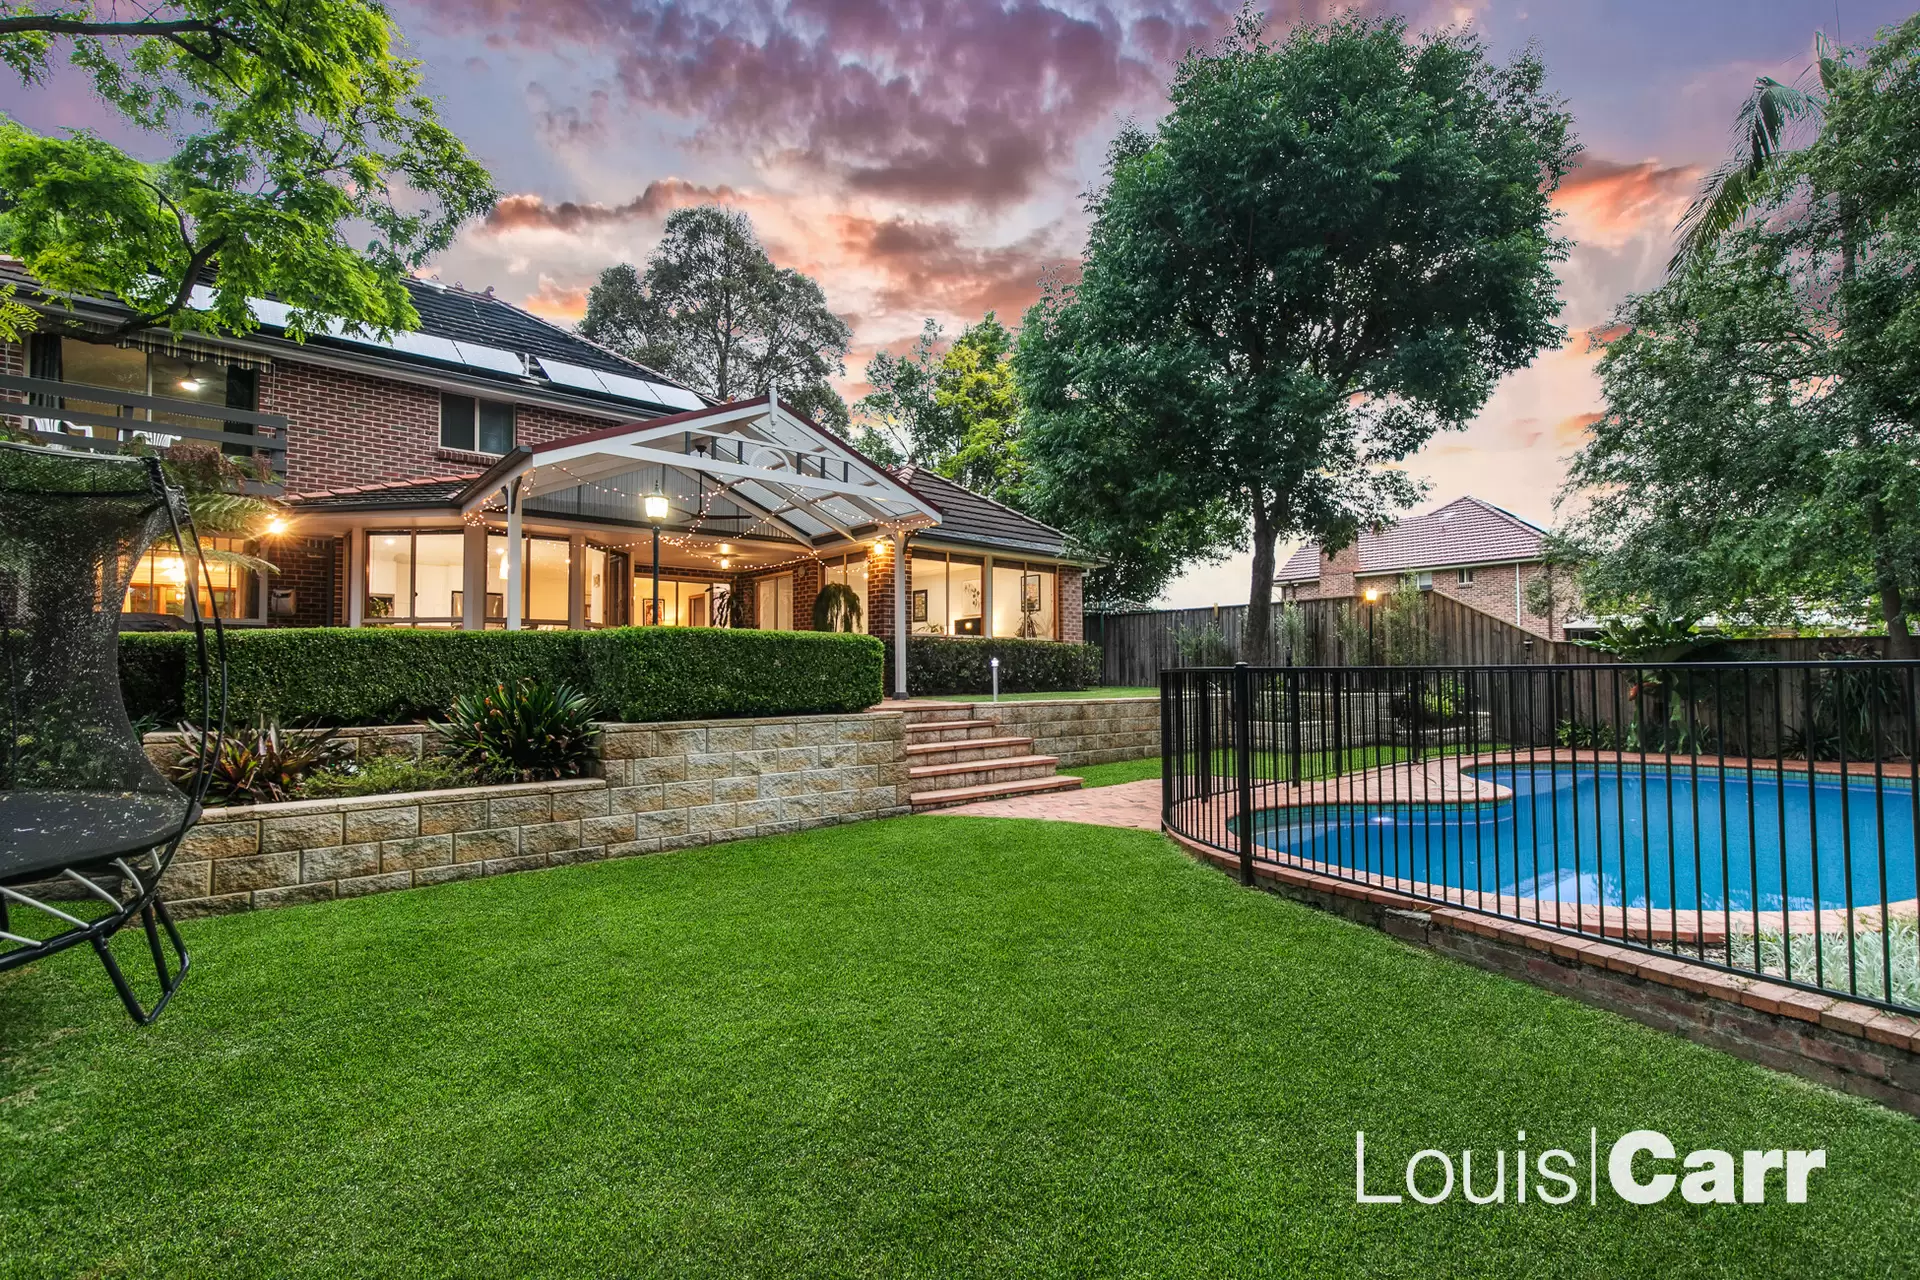 Photo #11: 15 Grangewood Place, West Pennant Hills - For Sale by Louis Carr Real Estate